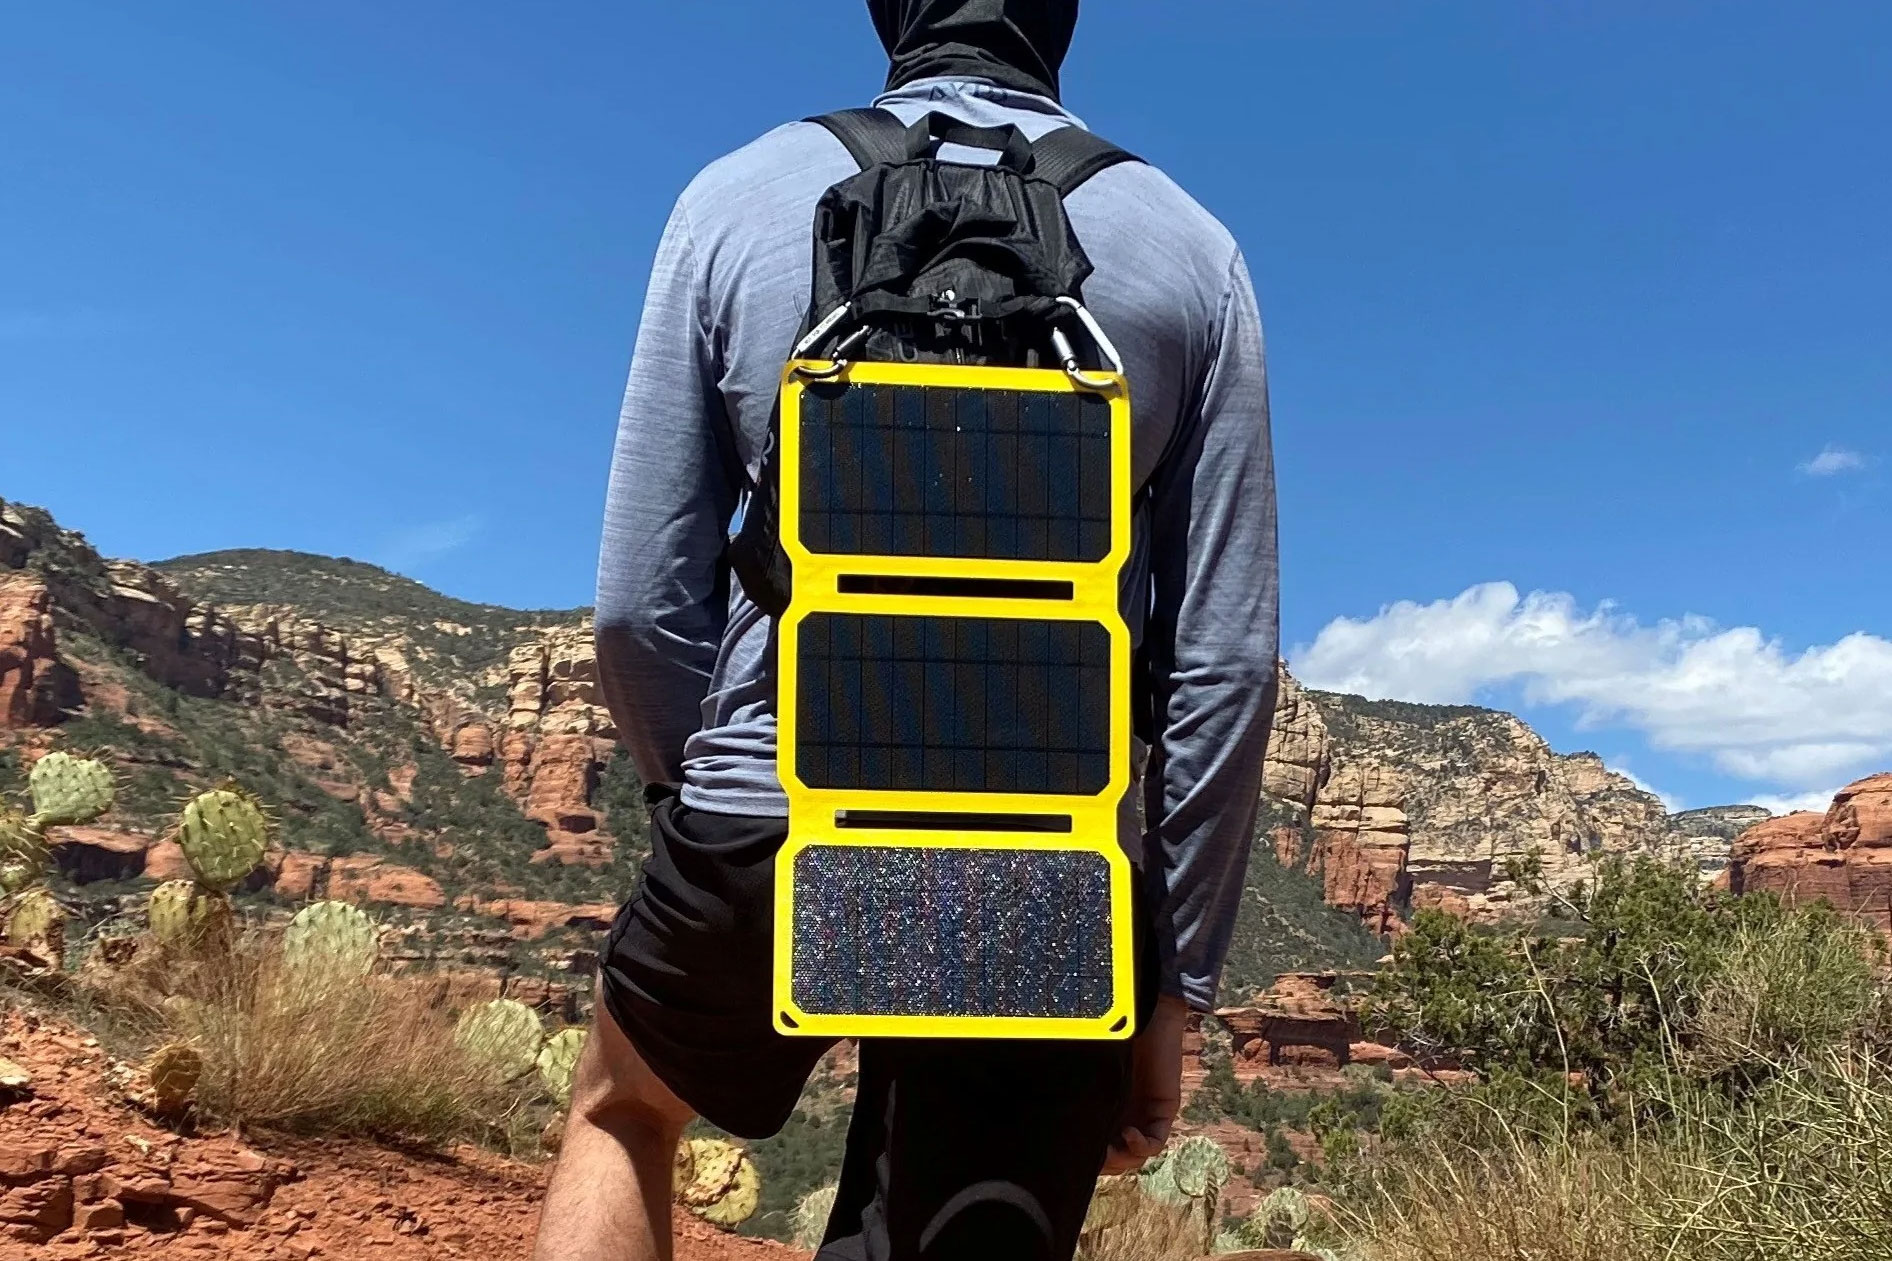 Skip tiny solar on your next camping trip. There is a better, easier way